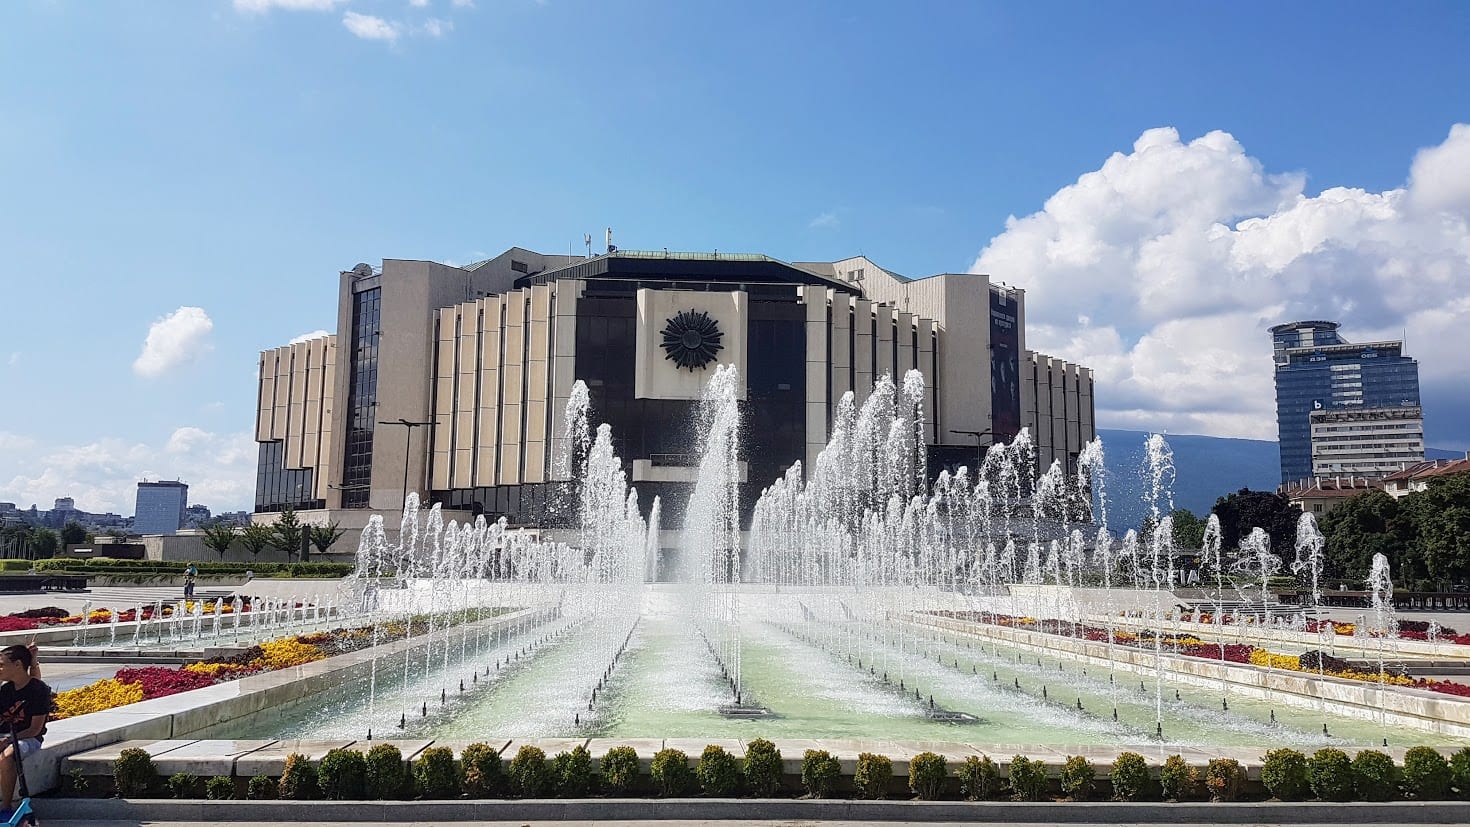 The National Palace of Culture in Sofia, Bulgaria